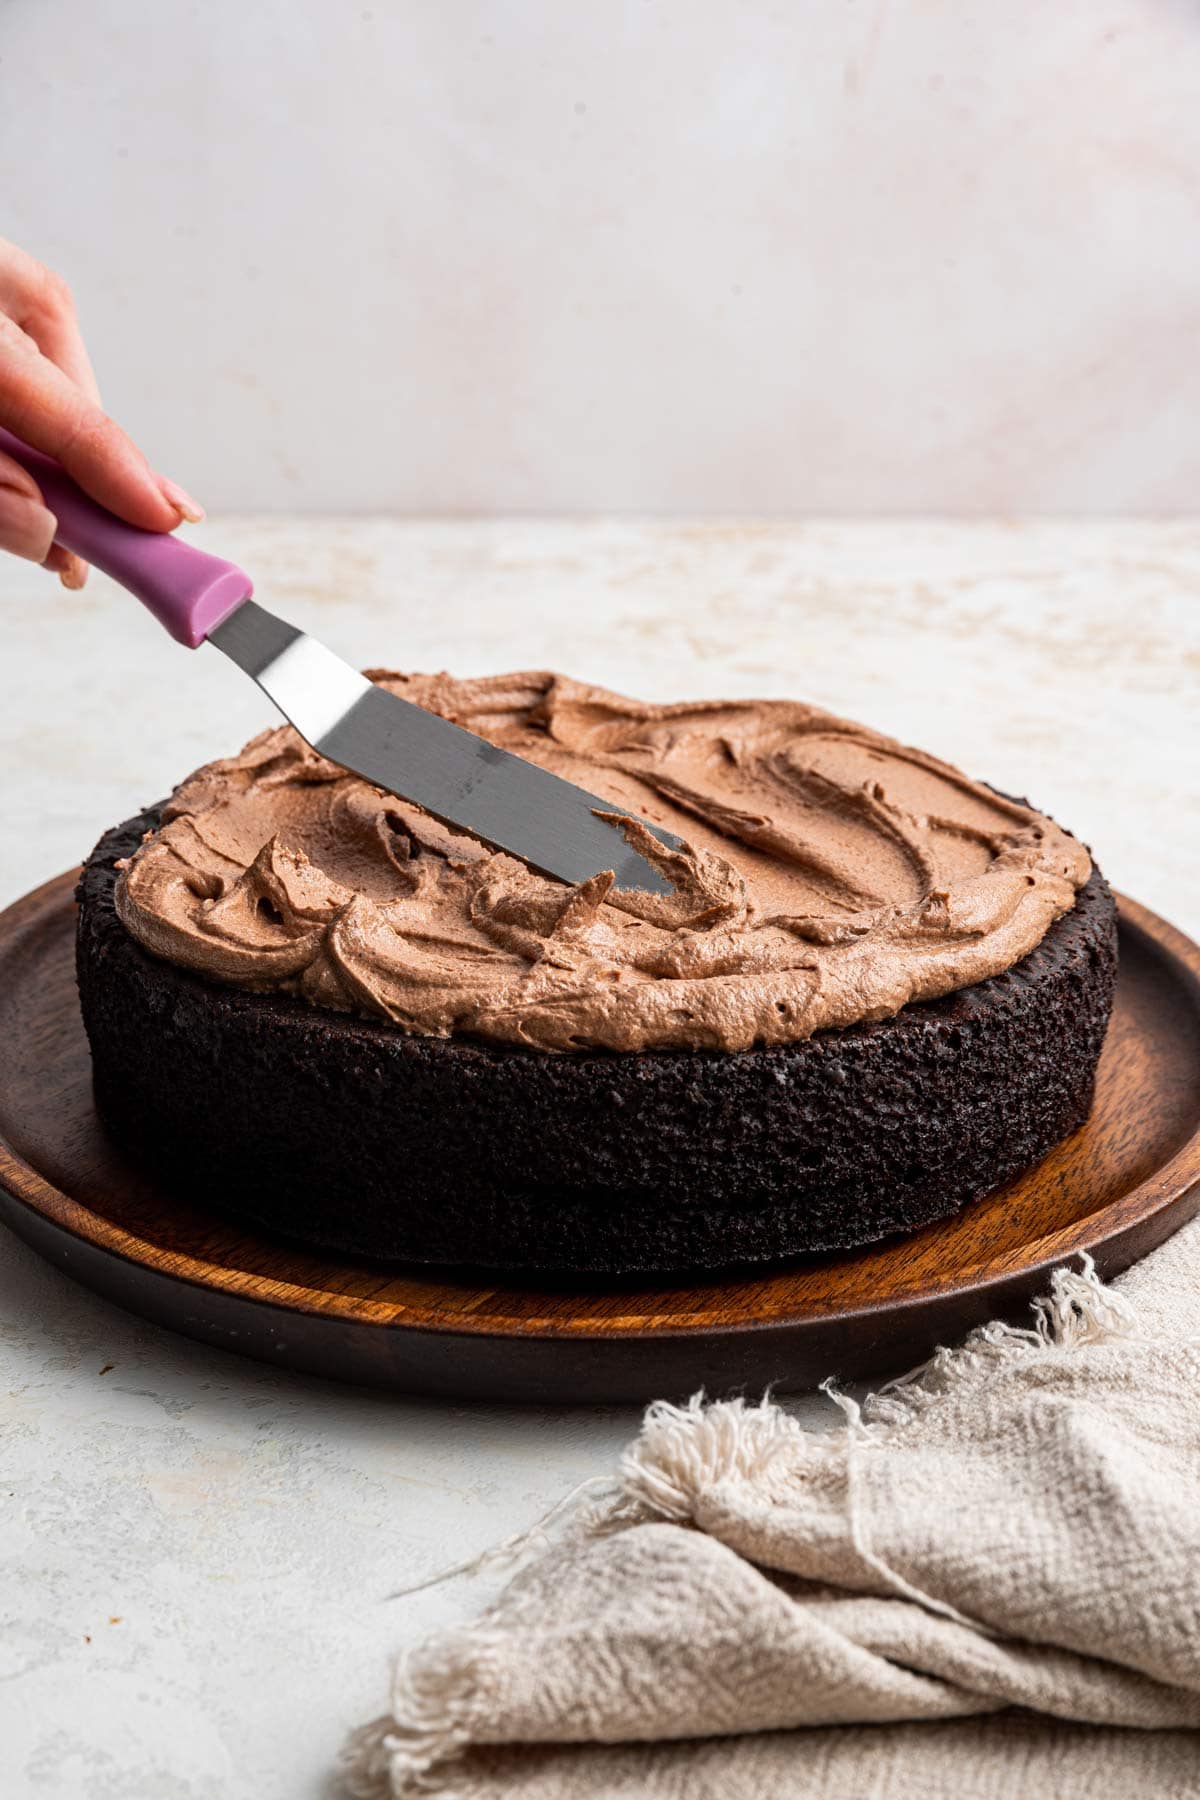 one layer of chocolate cake with chocolate frosting spread on the top.